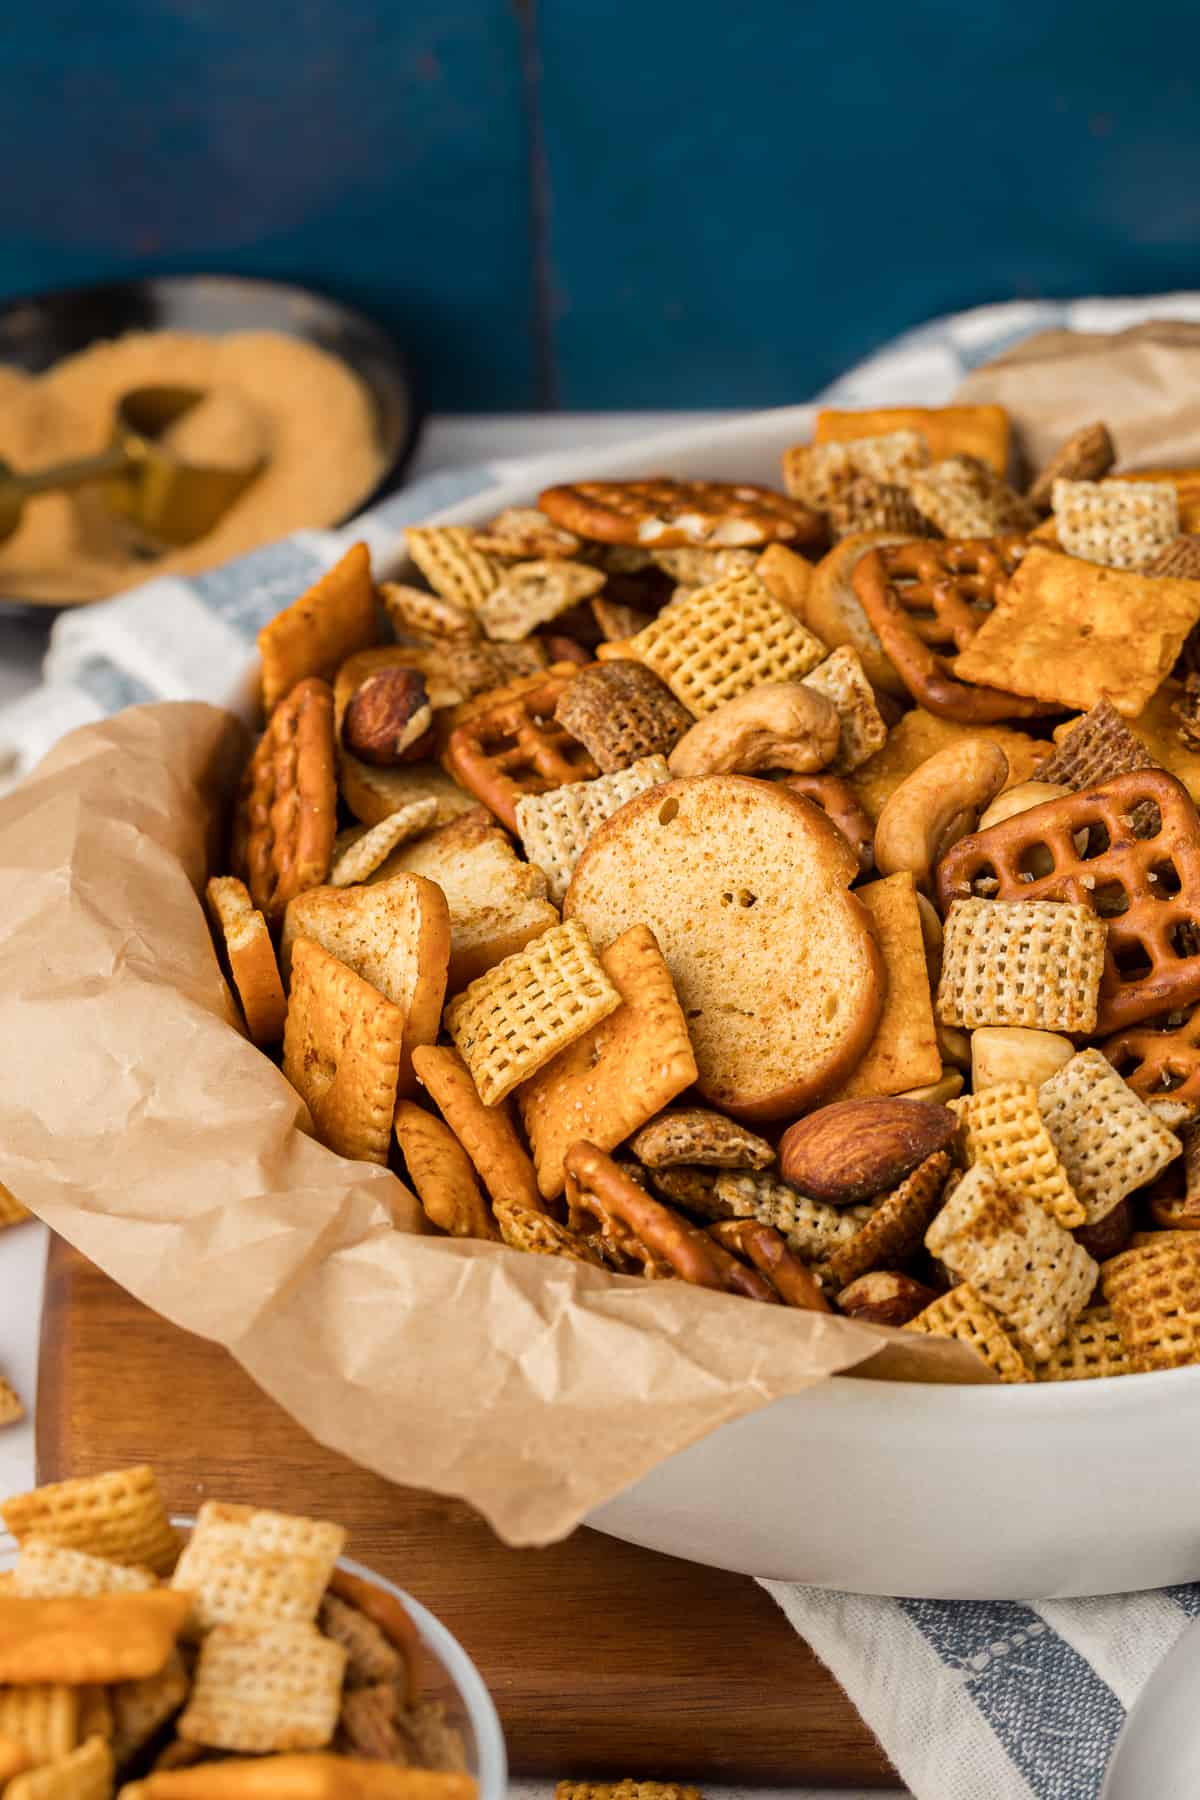 a white bowl lined with brown paper filled with chex mix sitting on a wood piece with a white and blue striped towel on it, a small bowl of chex mix beside it and a small bowel of seasoning in the background